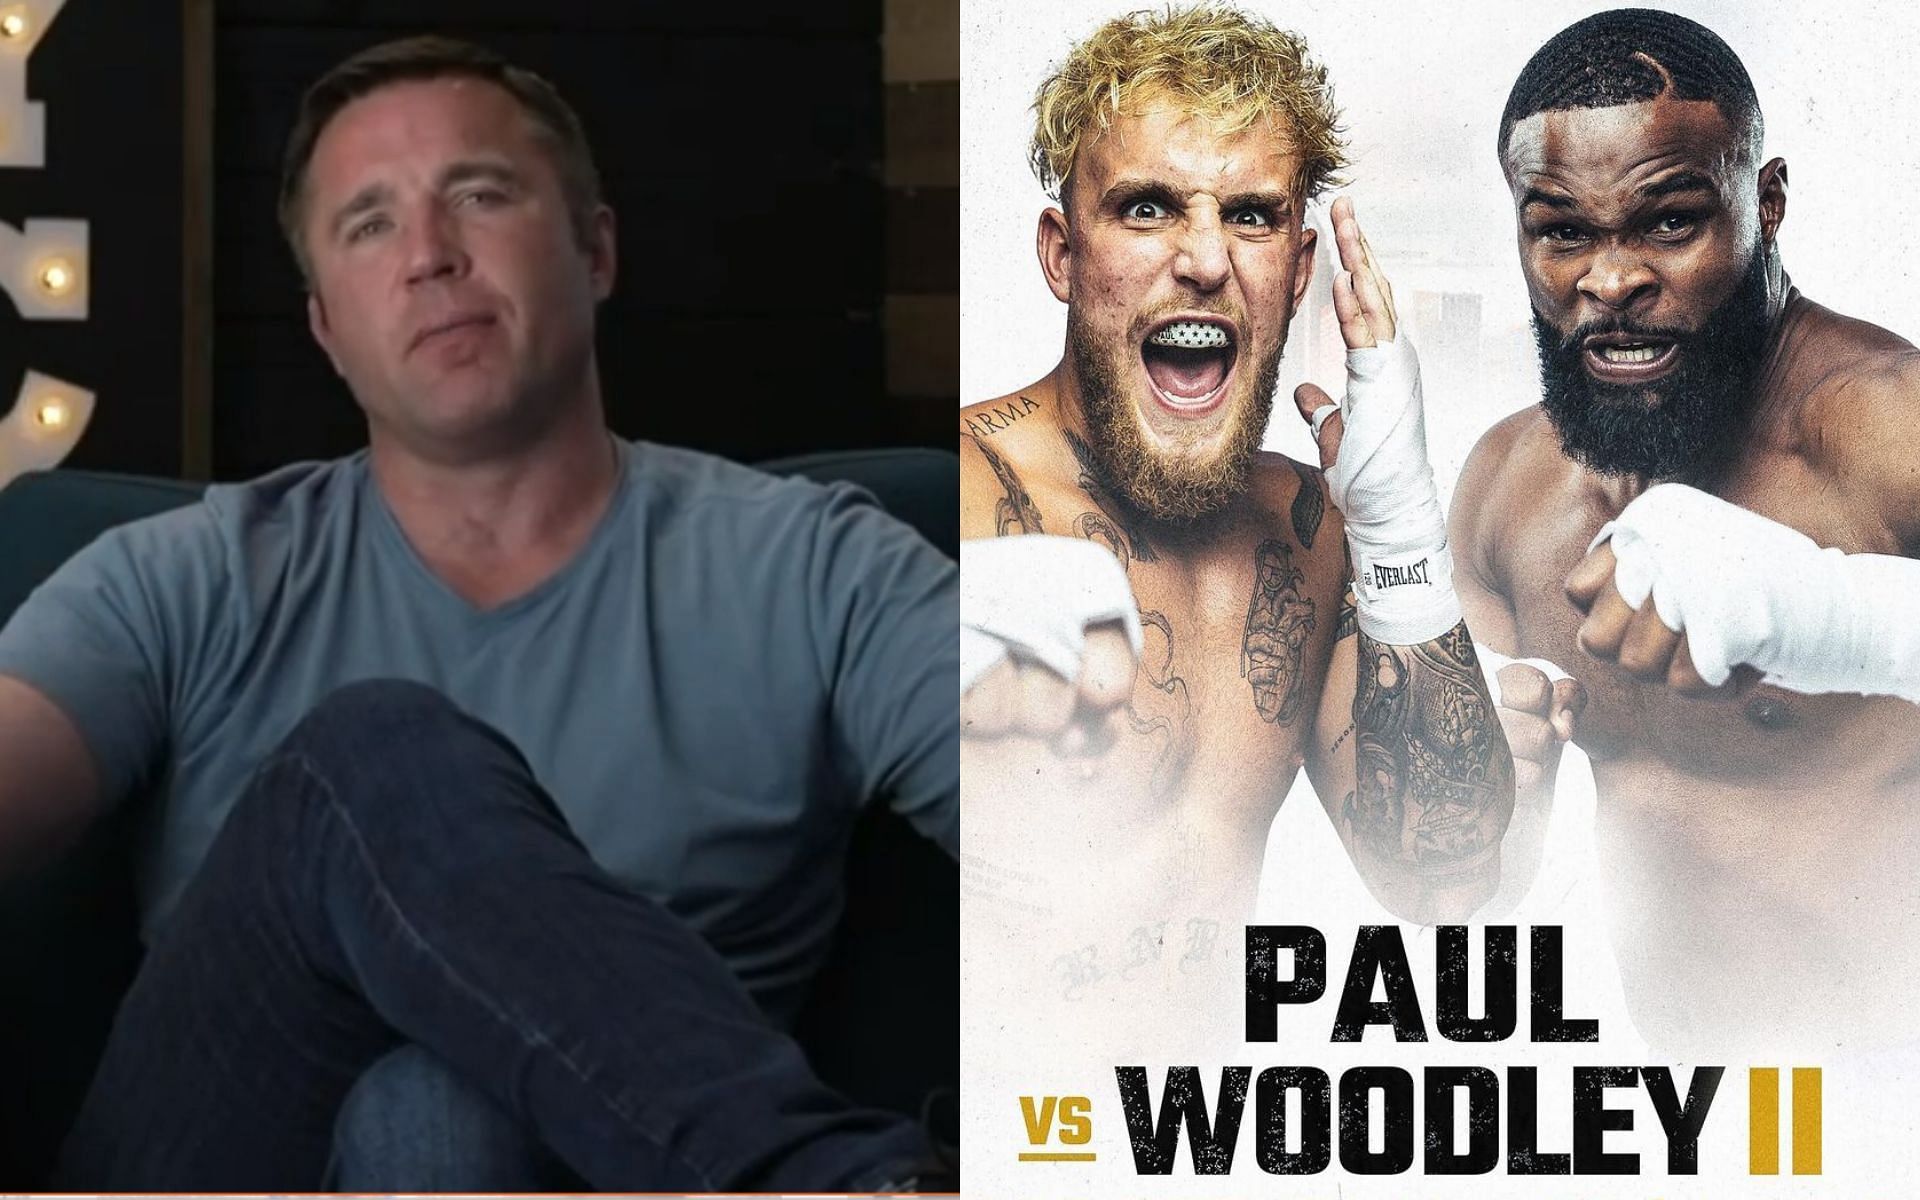 Chael Sonnen (L) and Jake Paul vs. Tyron Woodley 2 poster (R) via Instagram @sonnench and @twooodley